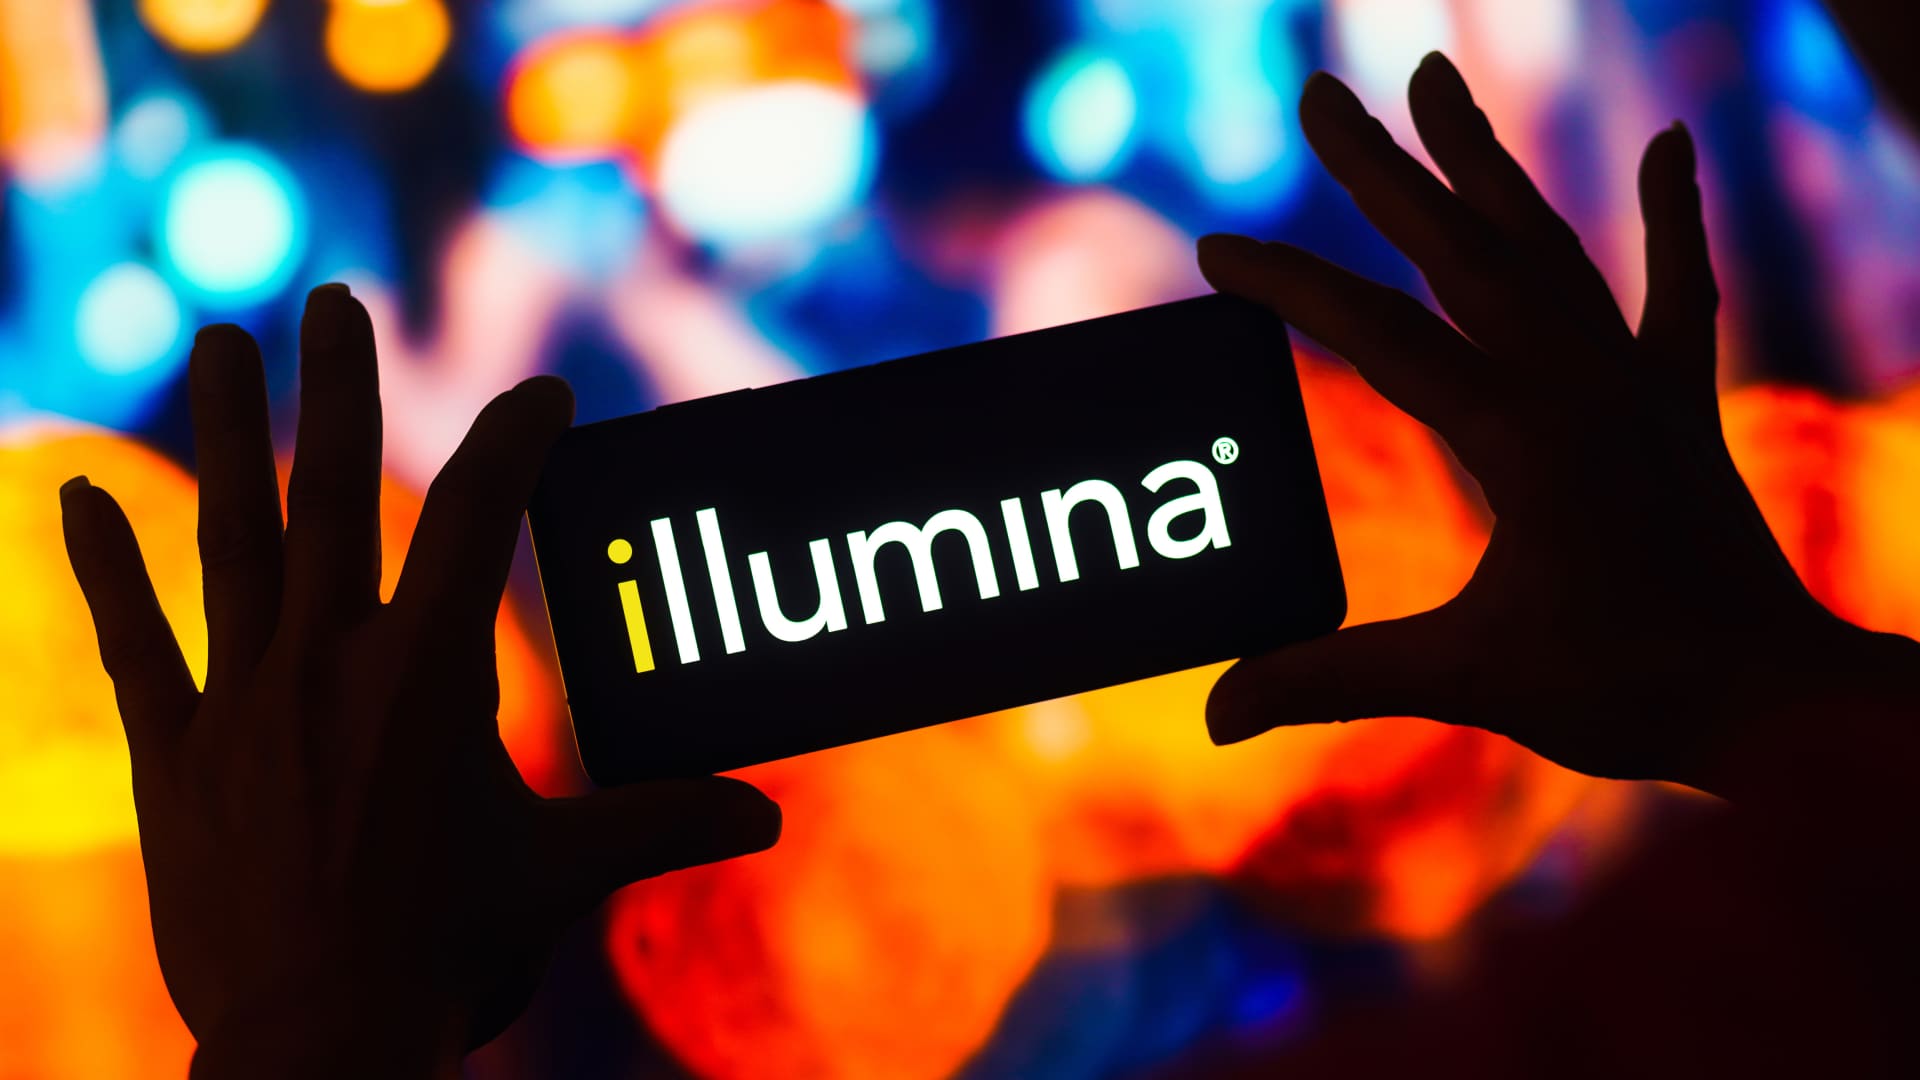 Illumina urges shareholders to reject Carl Icahn's board nominees as proxy fight heats up